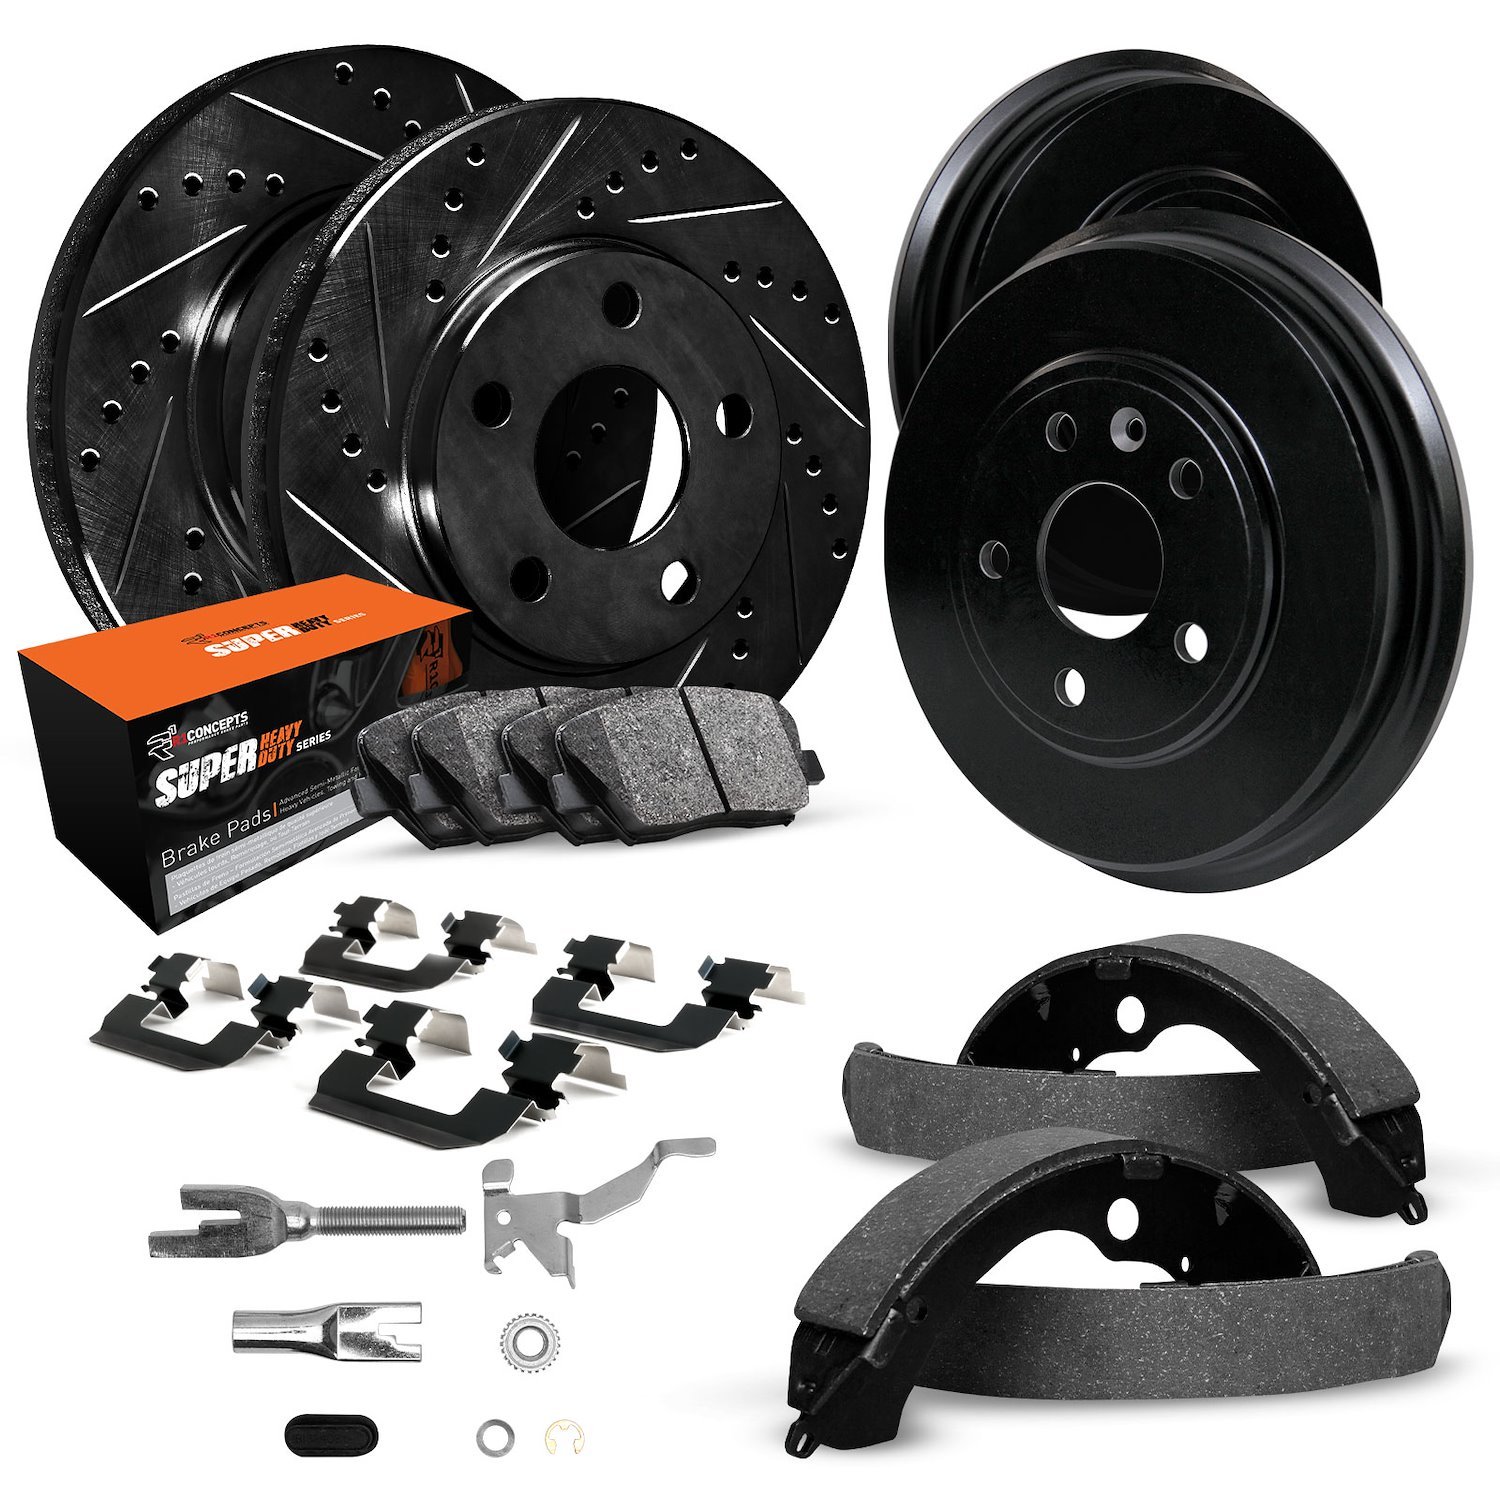 E-Line Drilled/Slotted Black Rotor & Drum Set w/Super-Duty Pads, Shoes, Hardware/Adjusters, 1980-1985 Ford/Lincoln/Mercury/Mazda